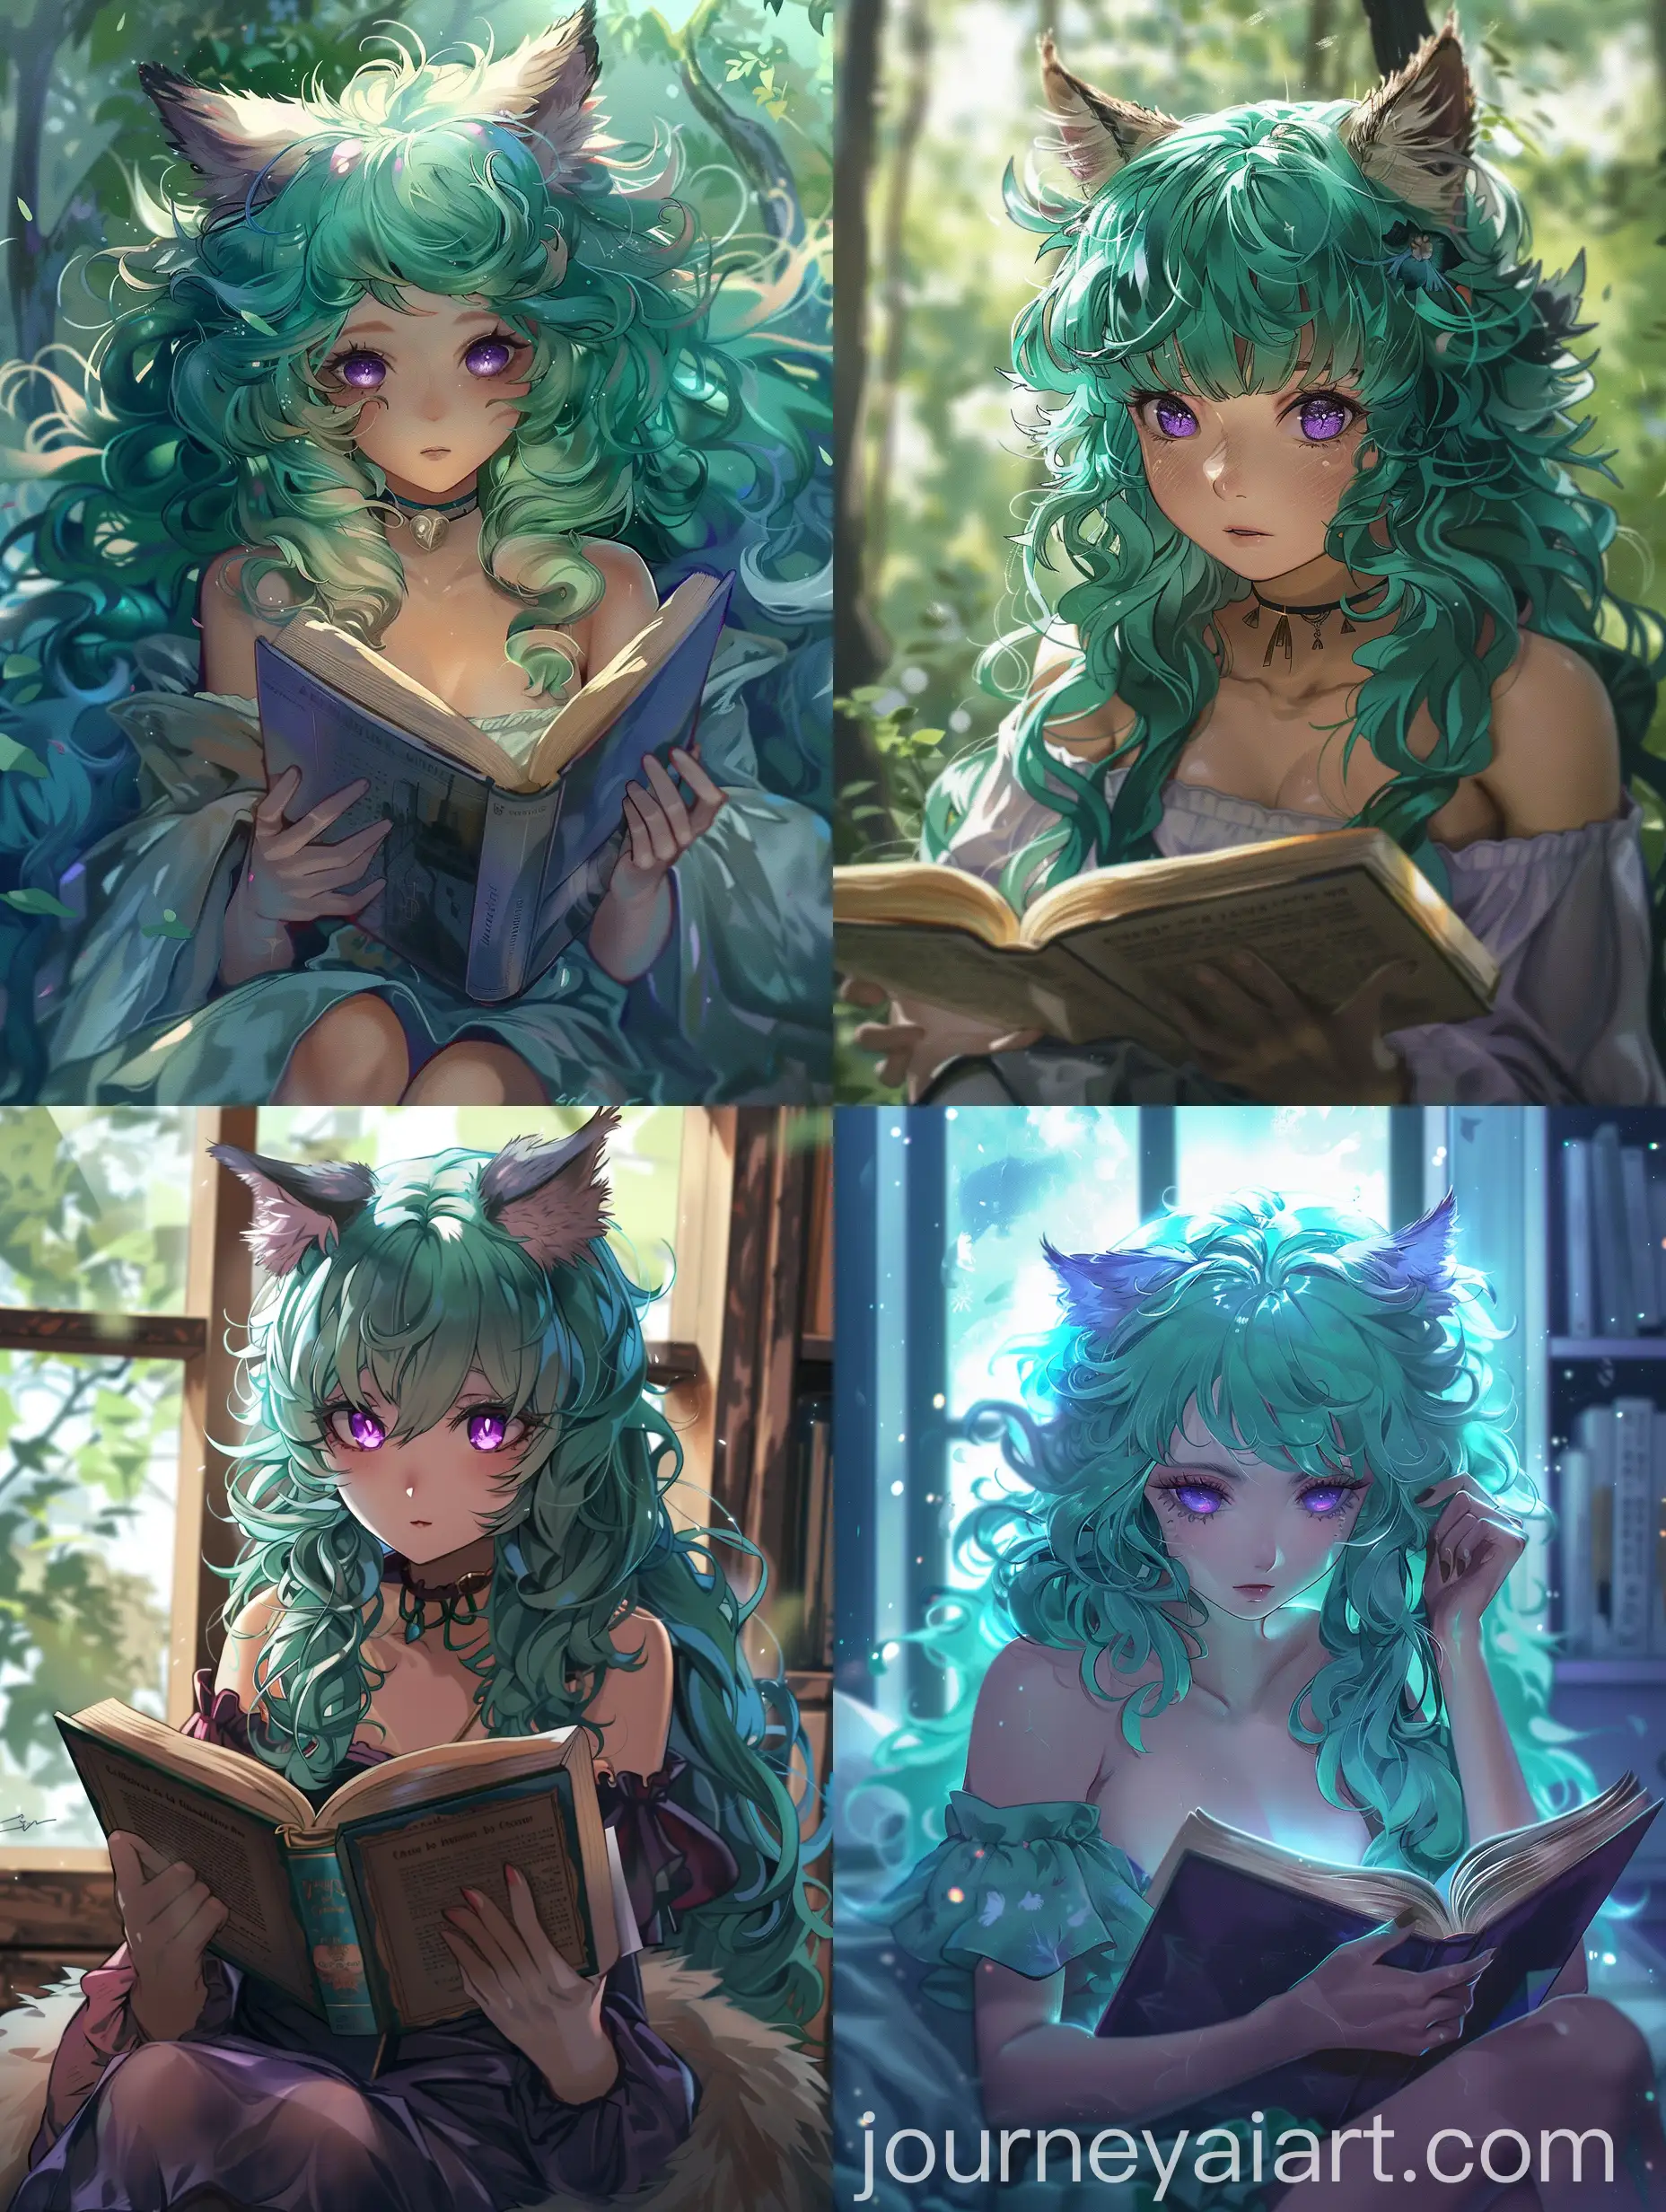 Anime-Girl-with-Sea-Green-Curly-Hair-and-Fox-Tails-Reading-a-Book